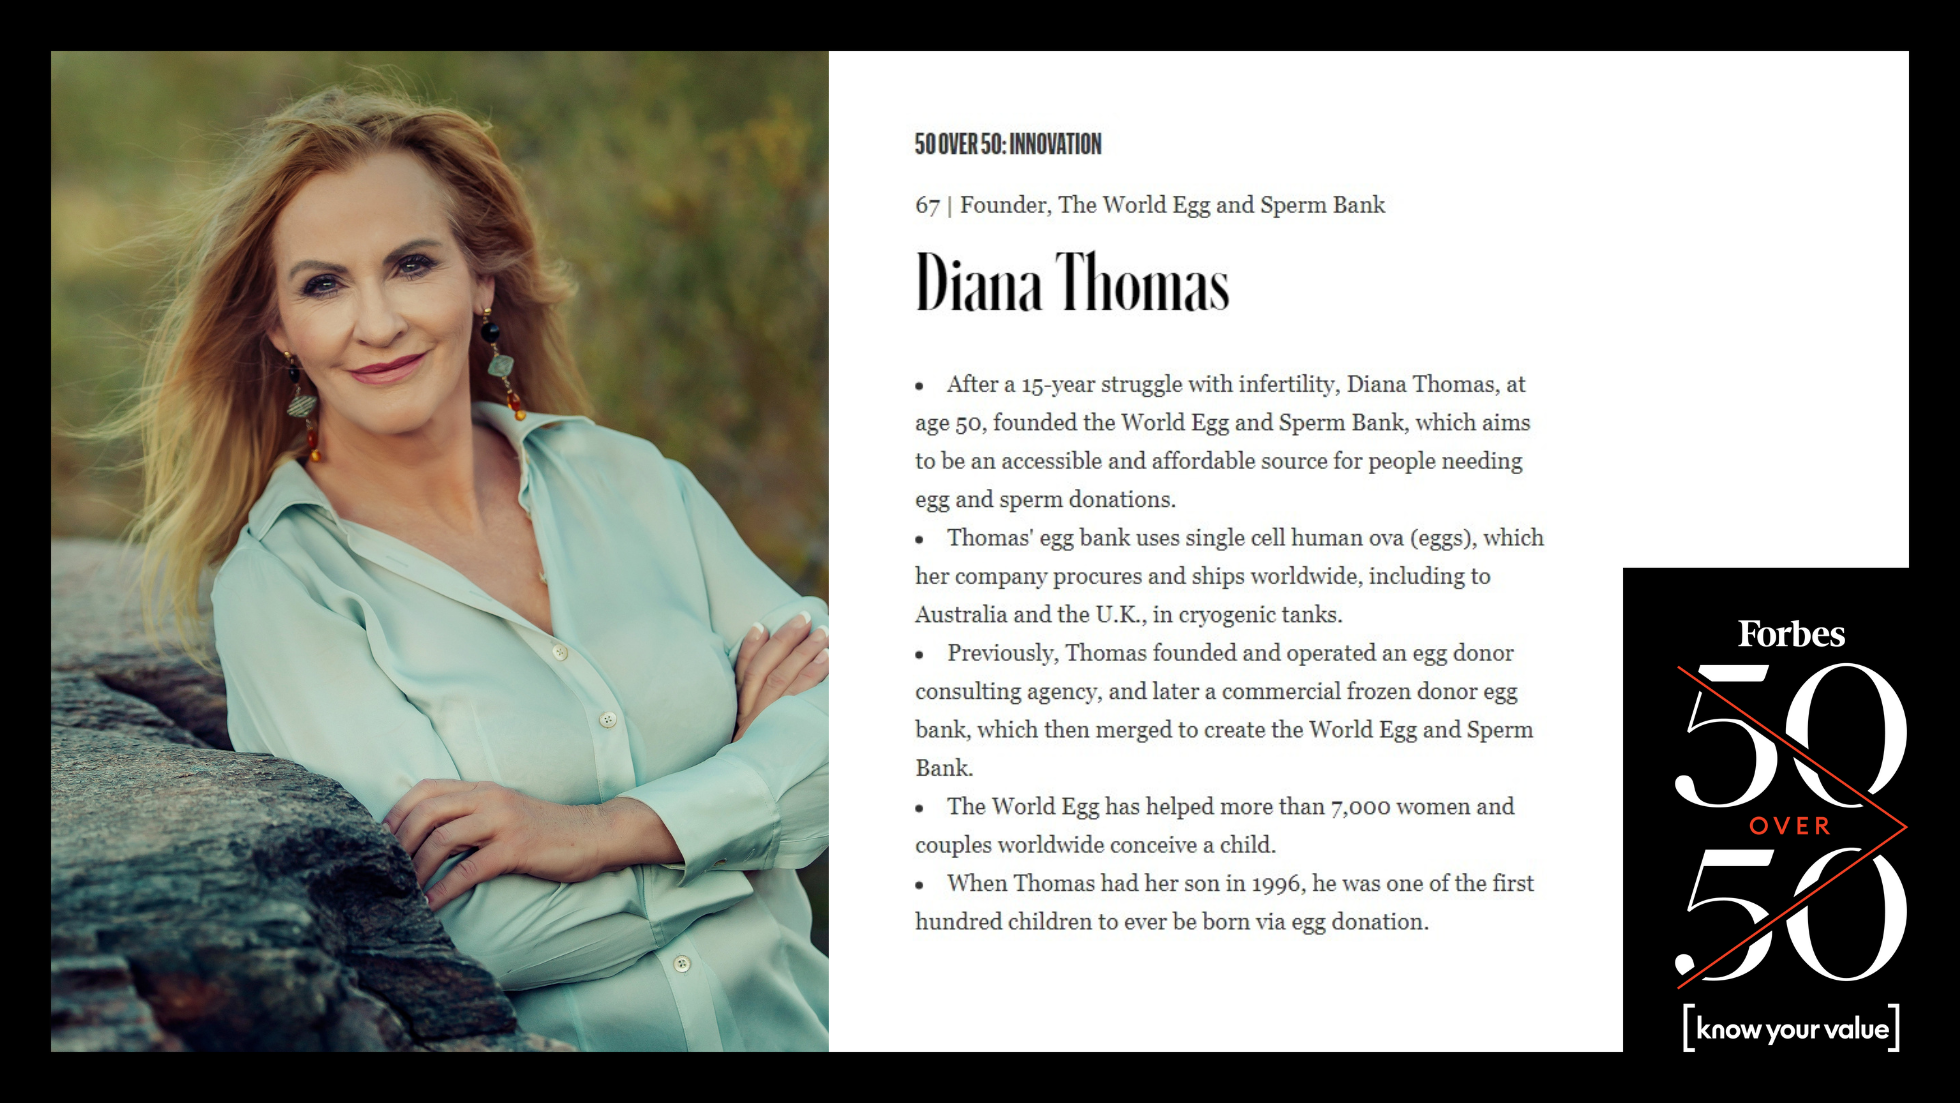 Diana Thomas Pioneering Reproductive Innovation - Forbes 50 Women Over 50